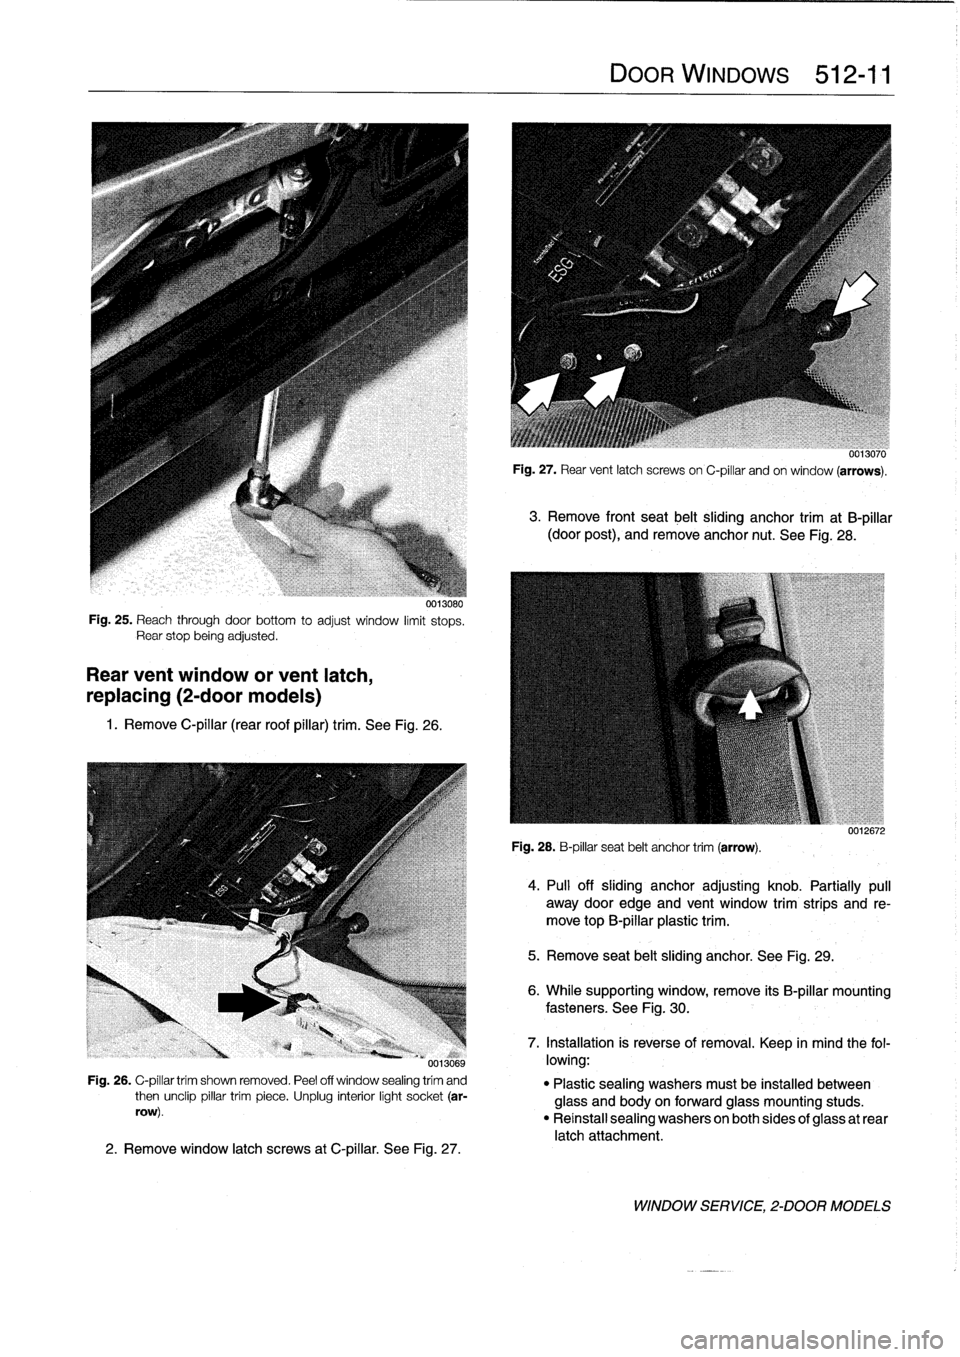 BMW 318i 1997 E36 Owners Manual 
0013080
Fig
.
25
.
Reach
through
doorbottom
to
adjust
window
limit
stops
.
Rear
stop
beingadjusted
.

Rear
vent
window
or
vent
latch,

replacing
(2-door
modeis)

1
.
Remove
C-pillar
(rear
roof
pillar